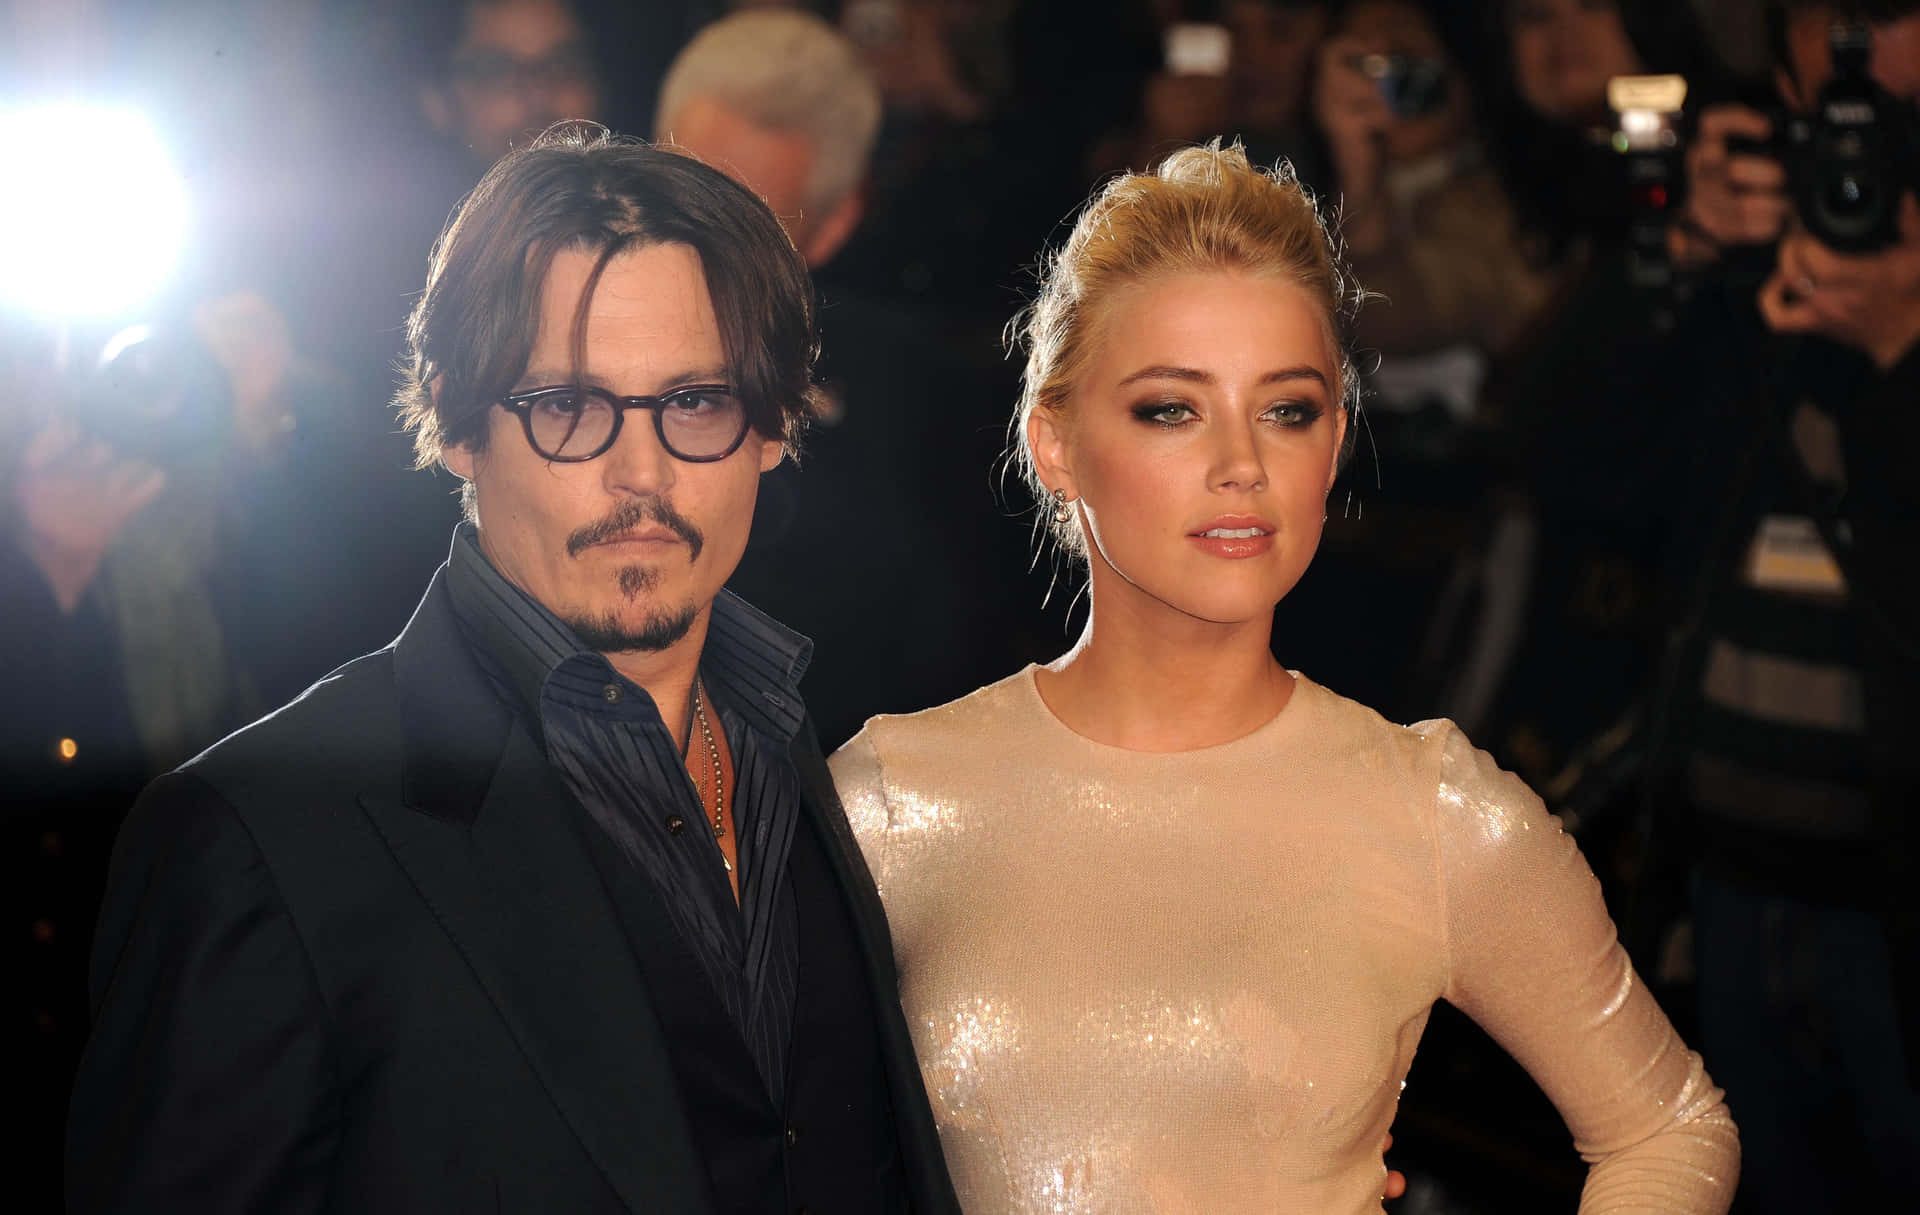 "Johnny Depp&Amber Heard, A Love Story That Conquers All"